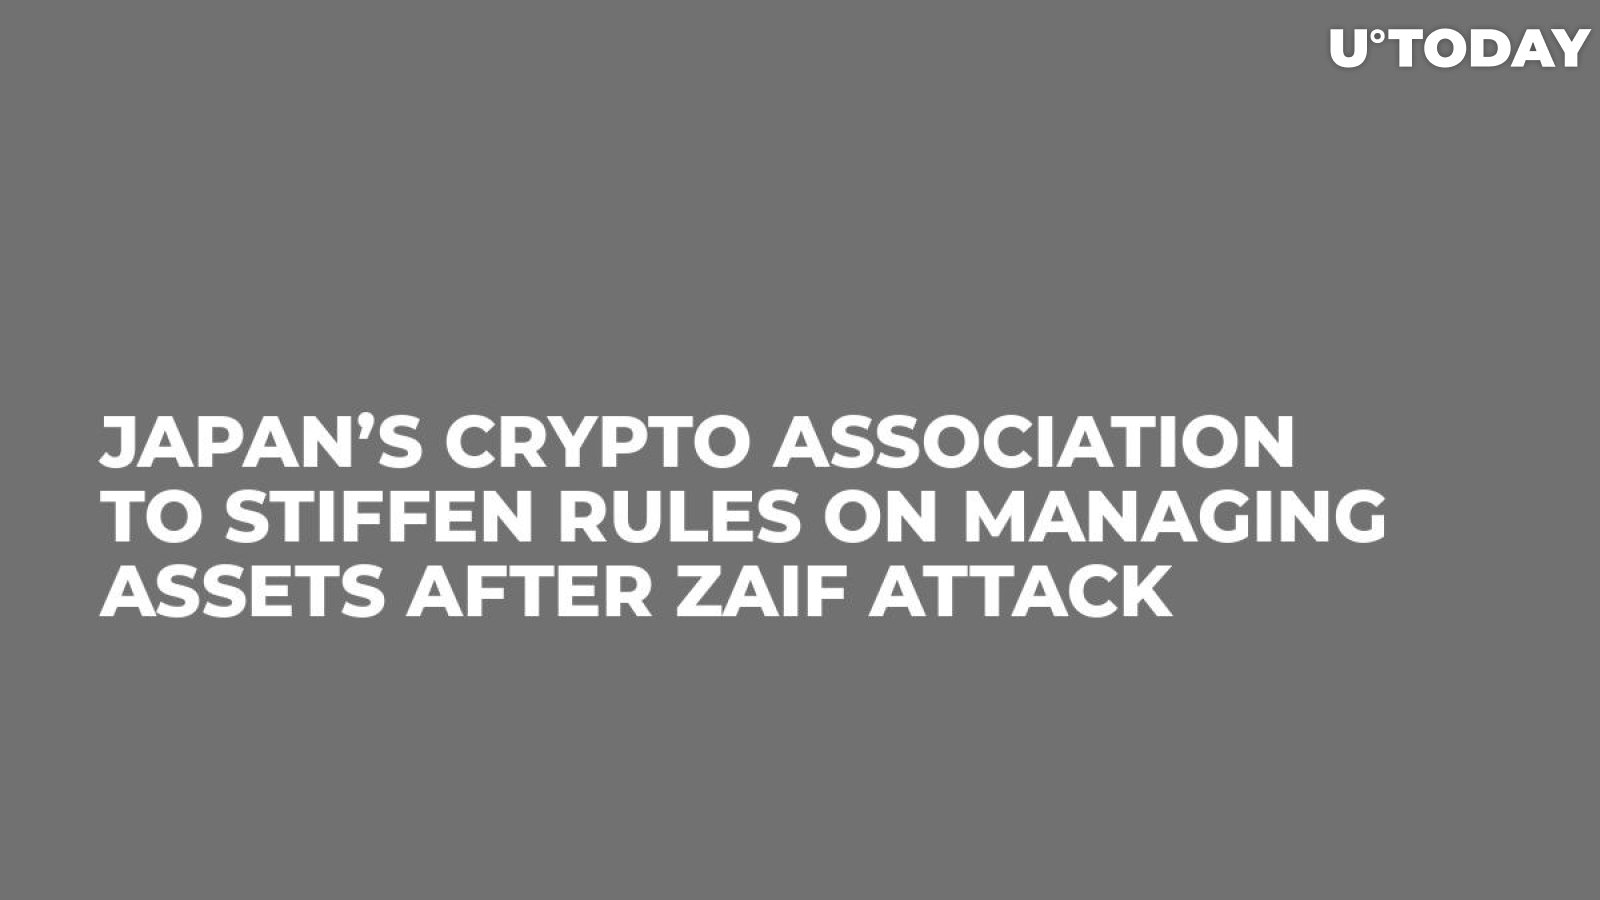 Japan’s Crypto Association to Stiffen Rules on Managing Assets after Zaif Attack